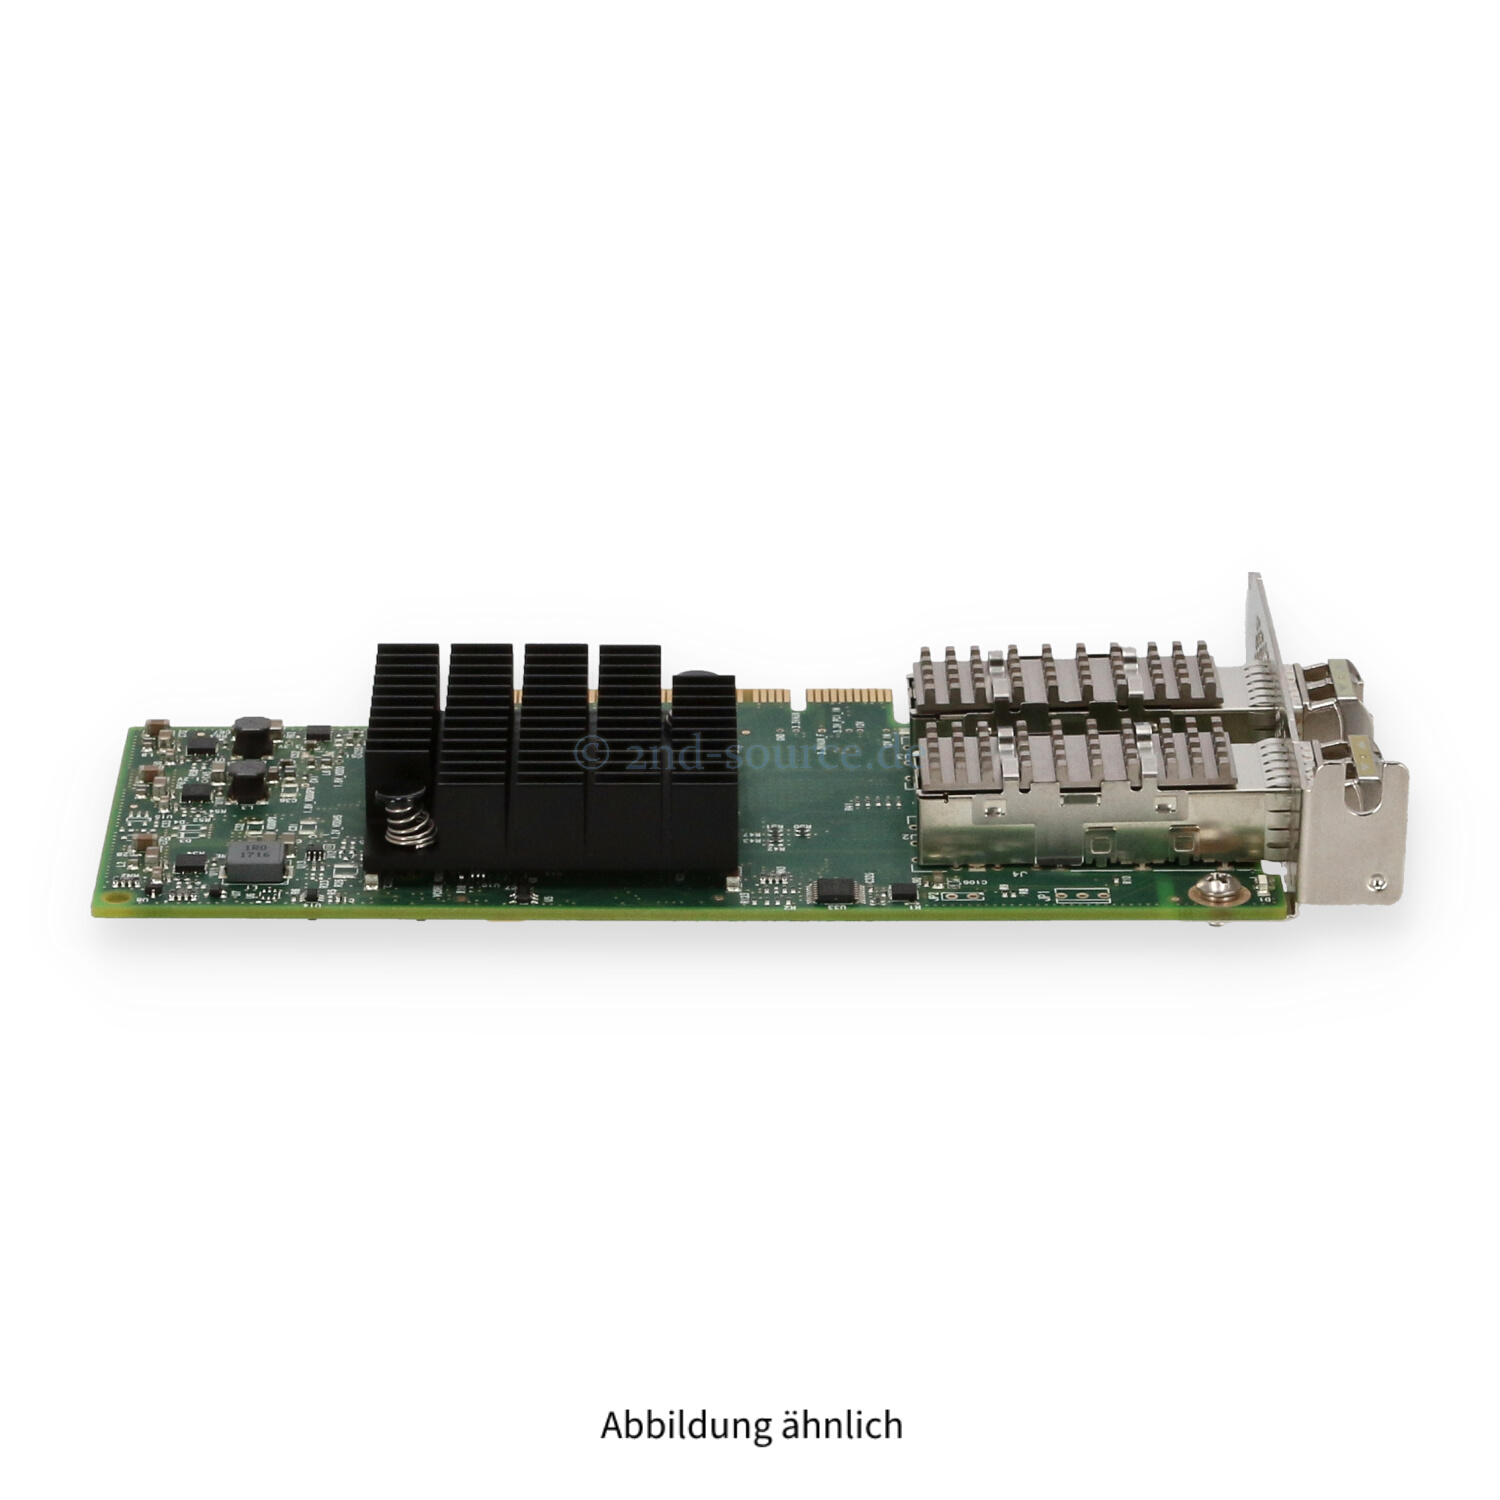 Mellanox CX4121A ConnectX-4LX 2x SFP+ 10GbE PCIe Ethernet Adapter Low Profile inkl. 2x GBIC